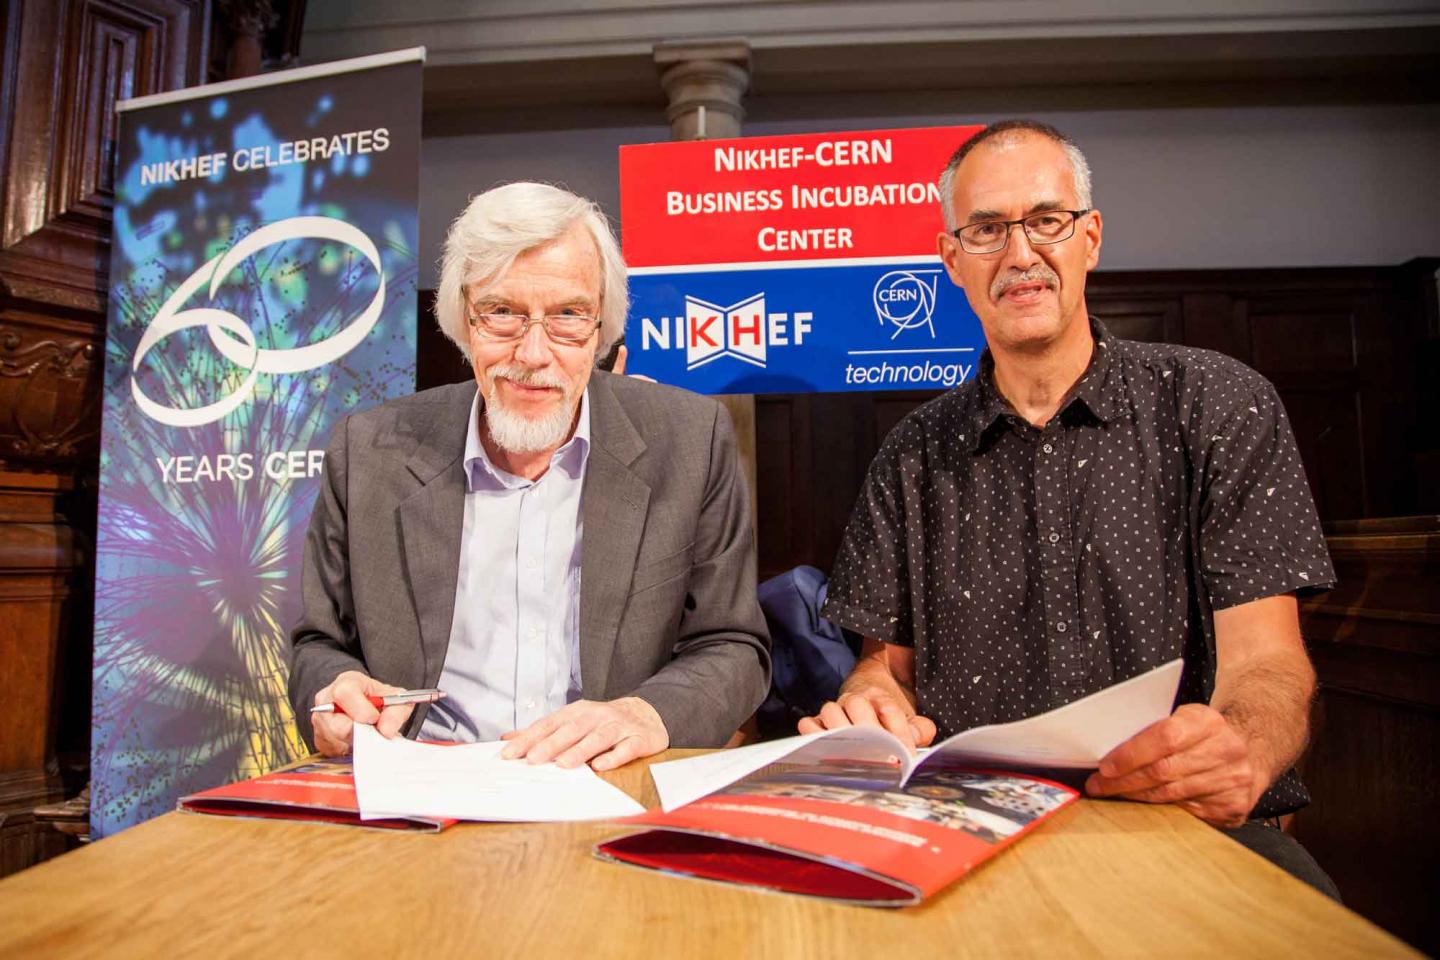 CERN supports new business incubation centre in The Netherlands 